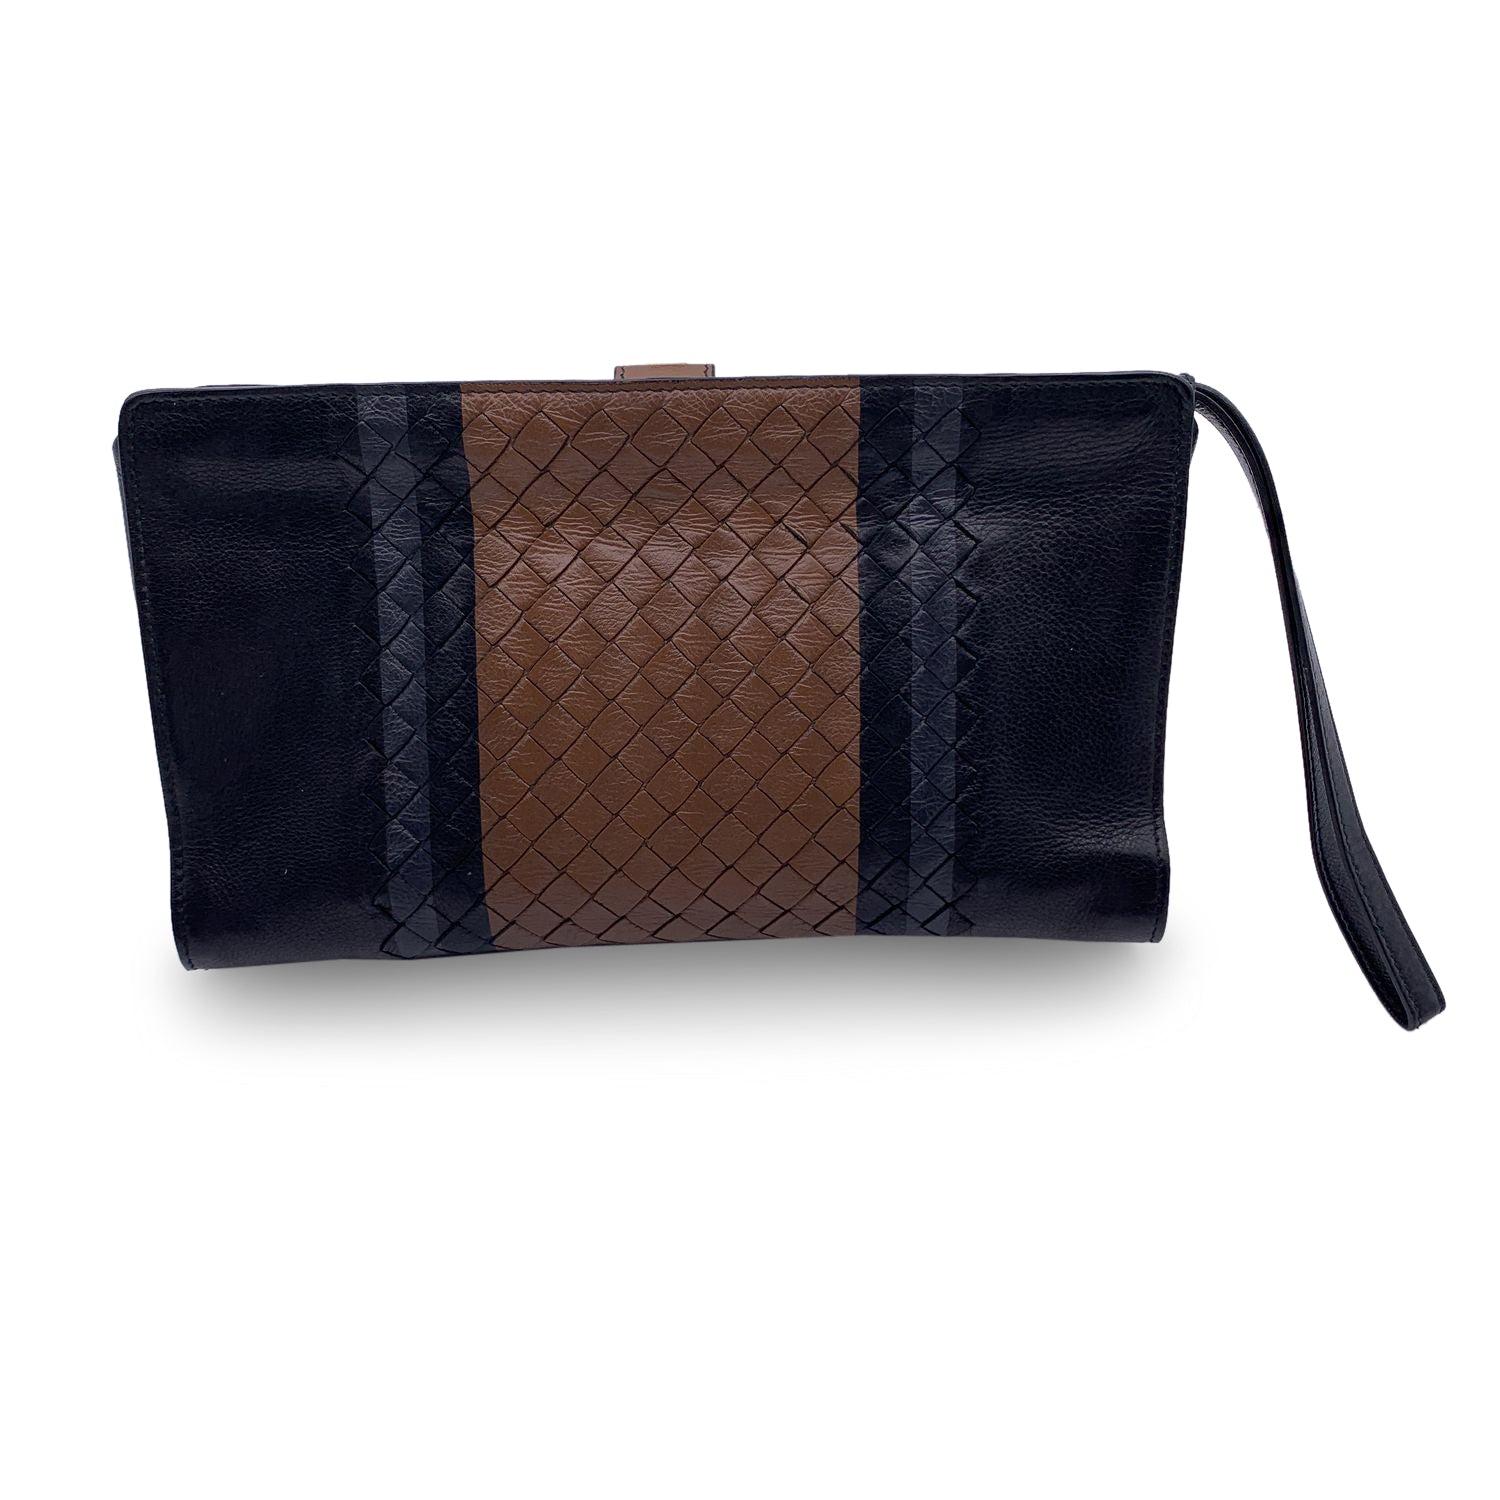 Bottega Veneta black intrecciato wrist bag. Black, brown and grey color. Button closure. It features 2 zipped pockets, a pen holder, 6 credit card slots and an open pocket to hold everything, from your cards to receipts and documents. 'Bottega